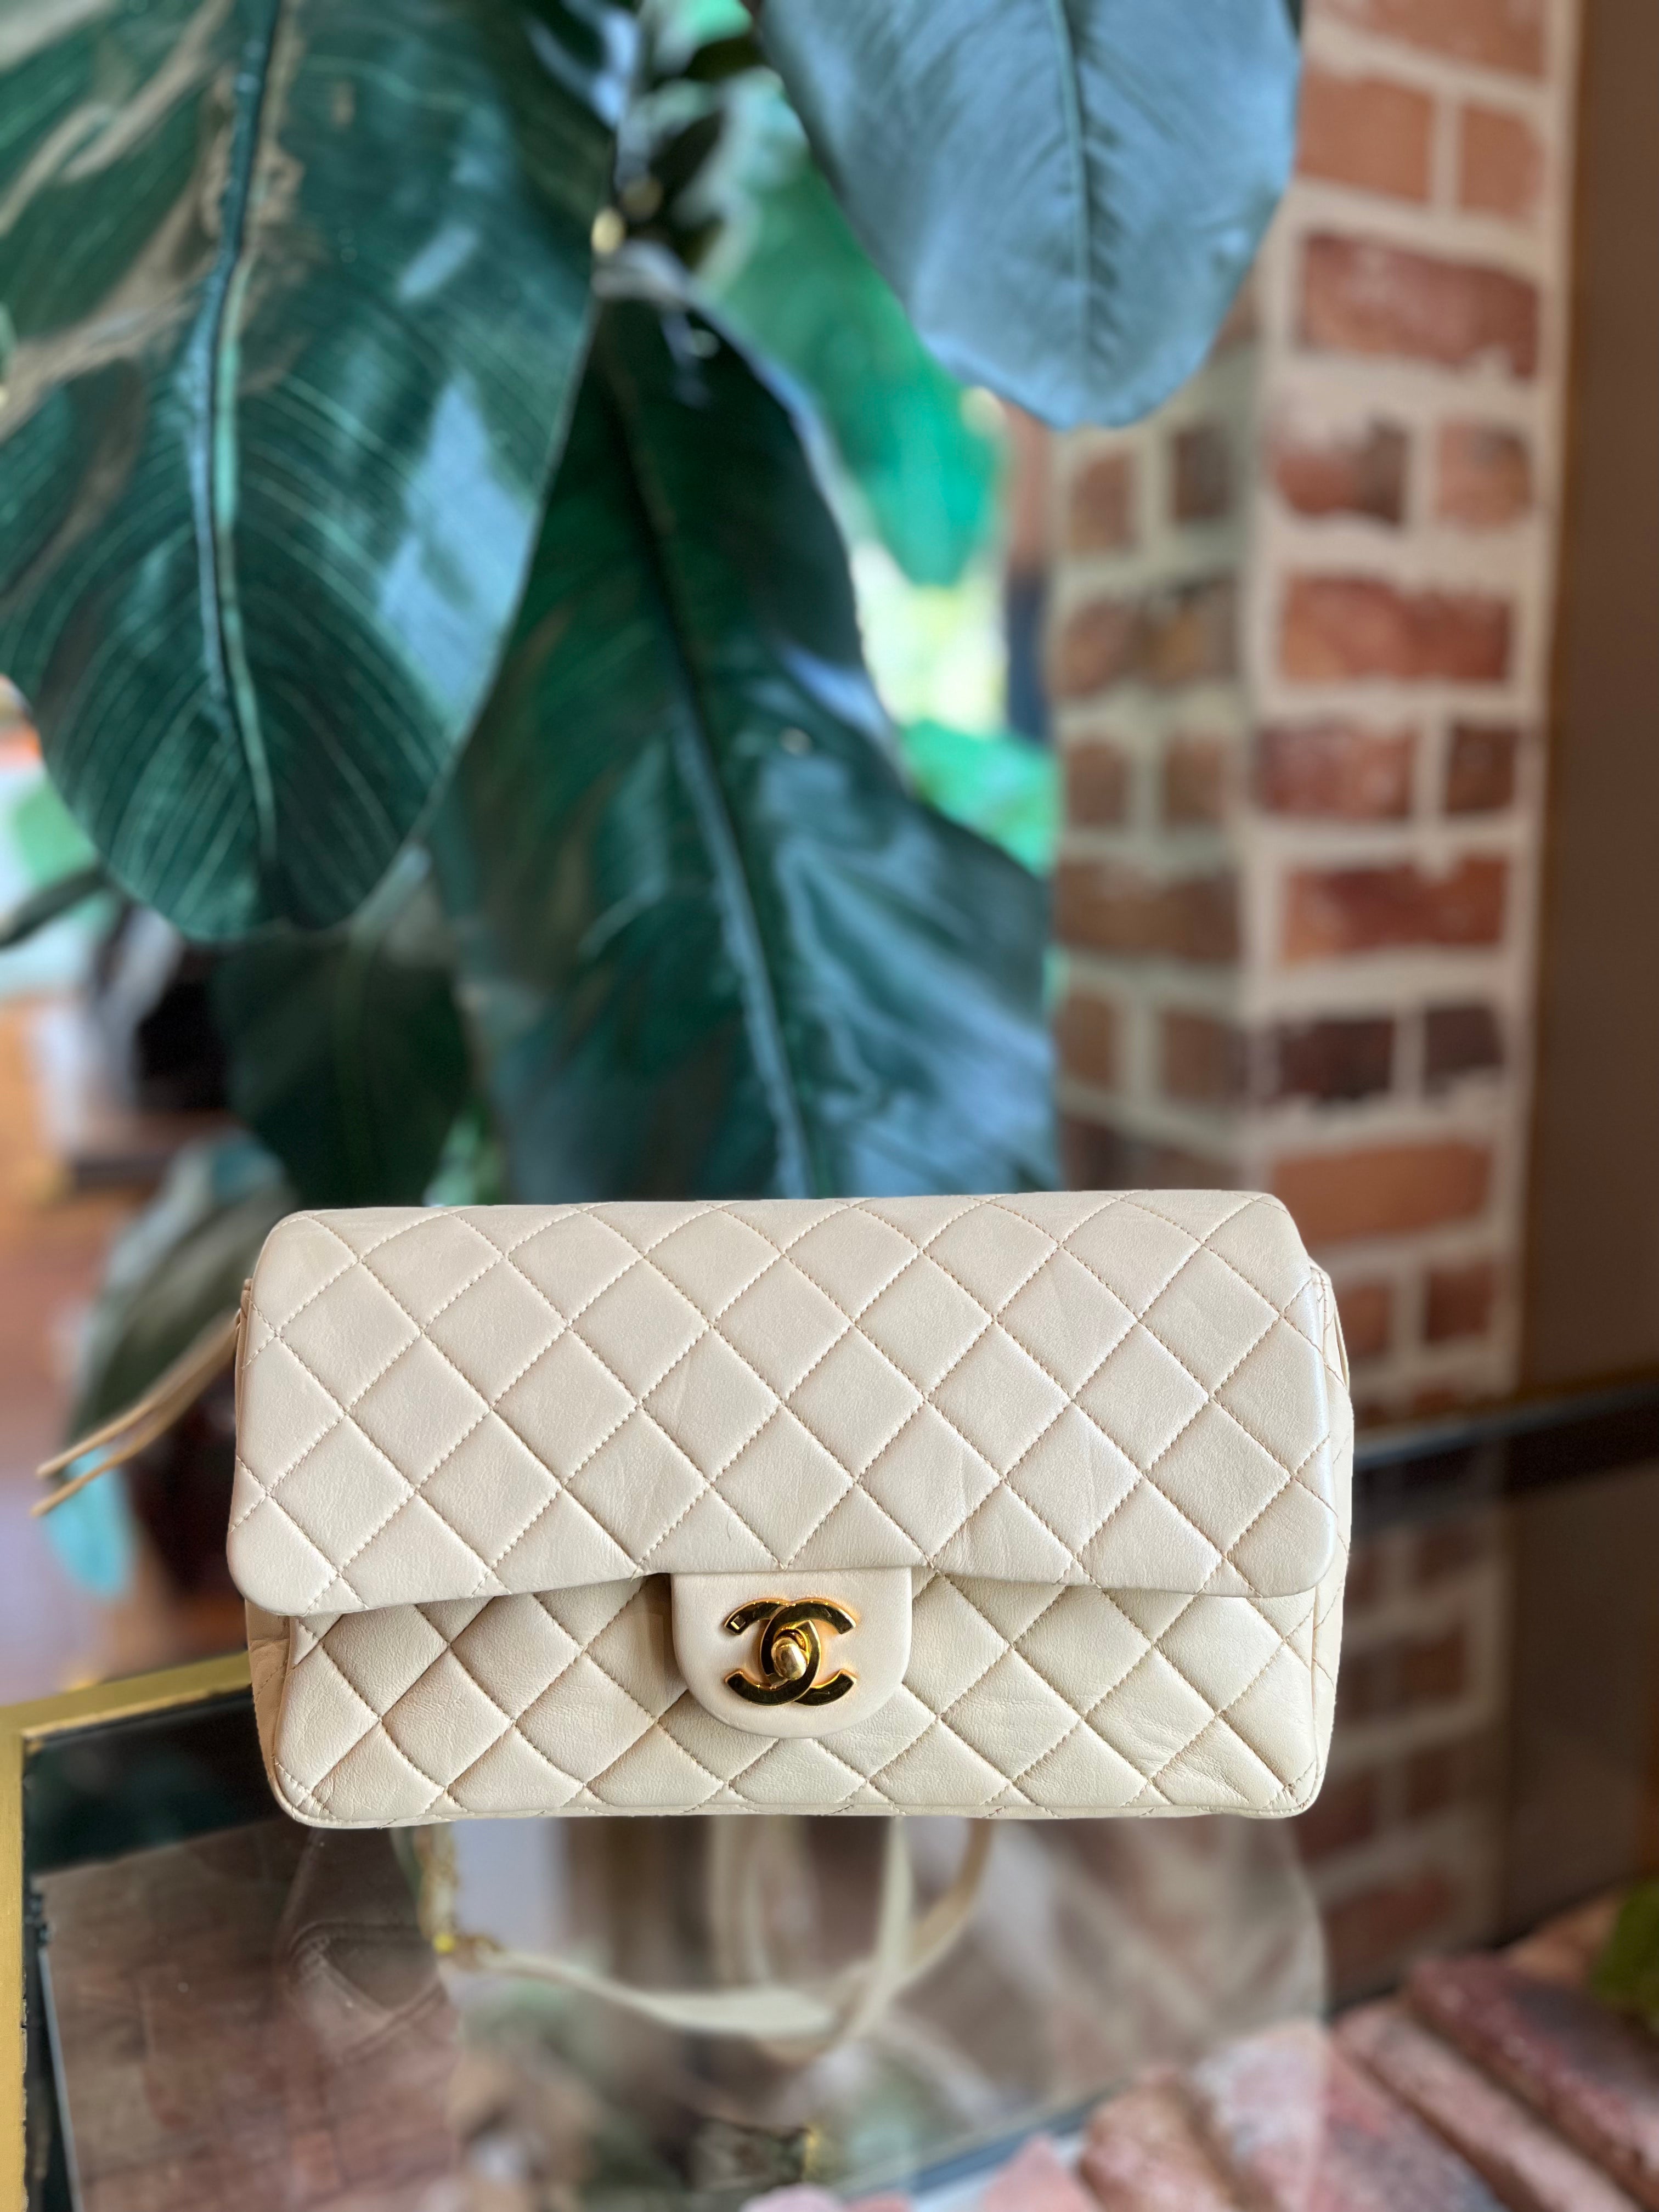 Bonhams : CHANEL BROWN LAMBSKIN QUILTED CLASSIC FLAP BAG WITH